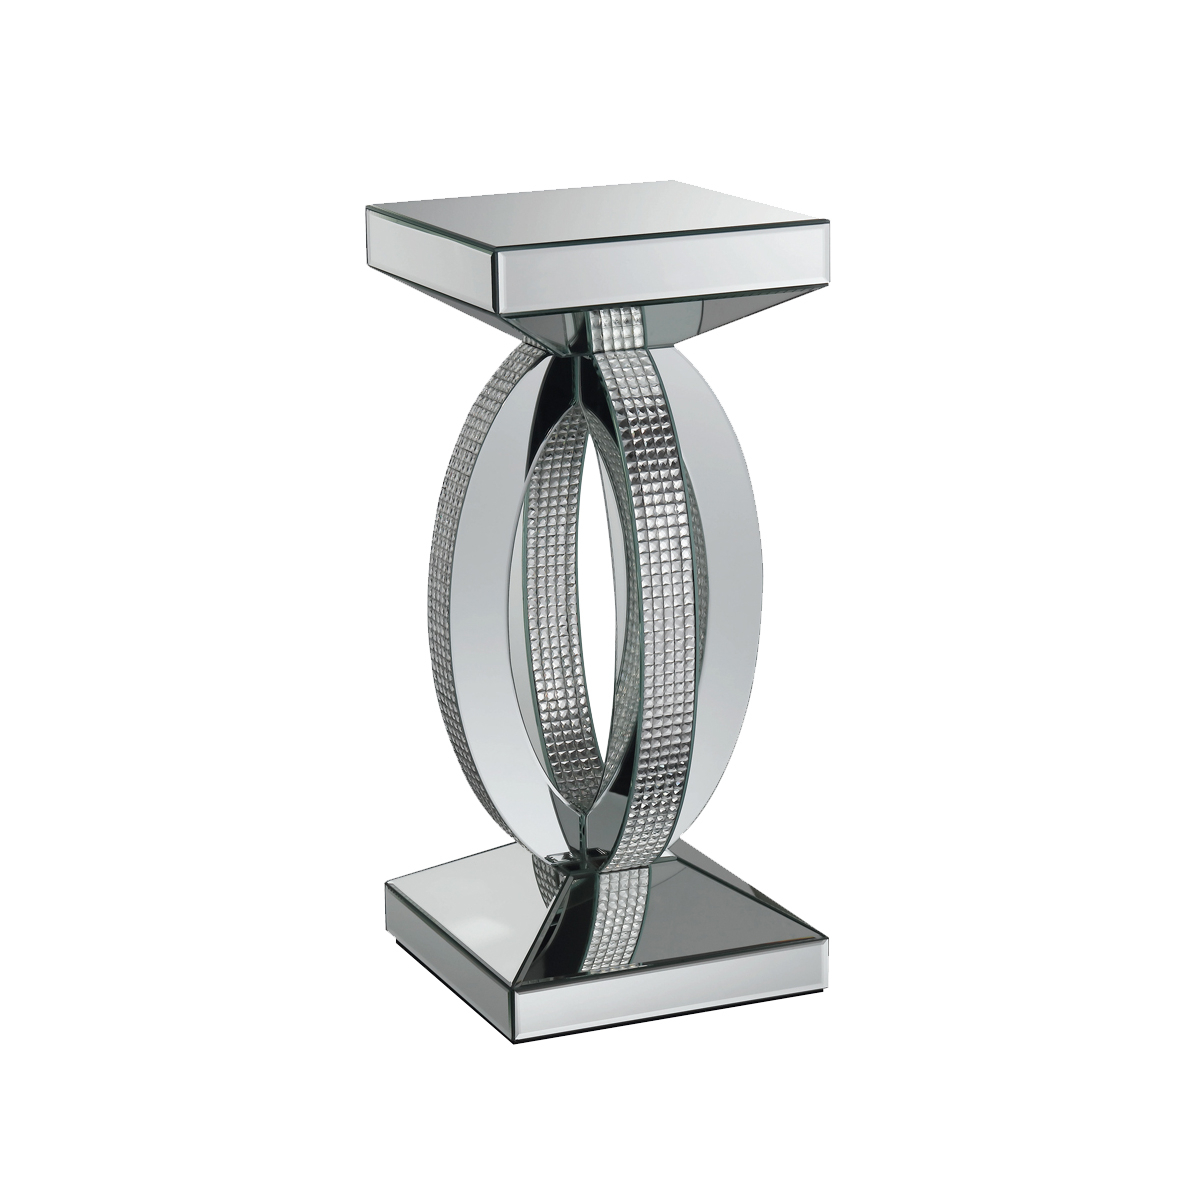 Square Wooden End Table With Curved Body And Rhinestone Accents, Silver- Saltoro Sherpi